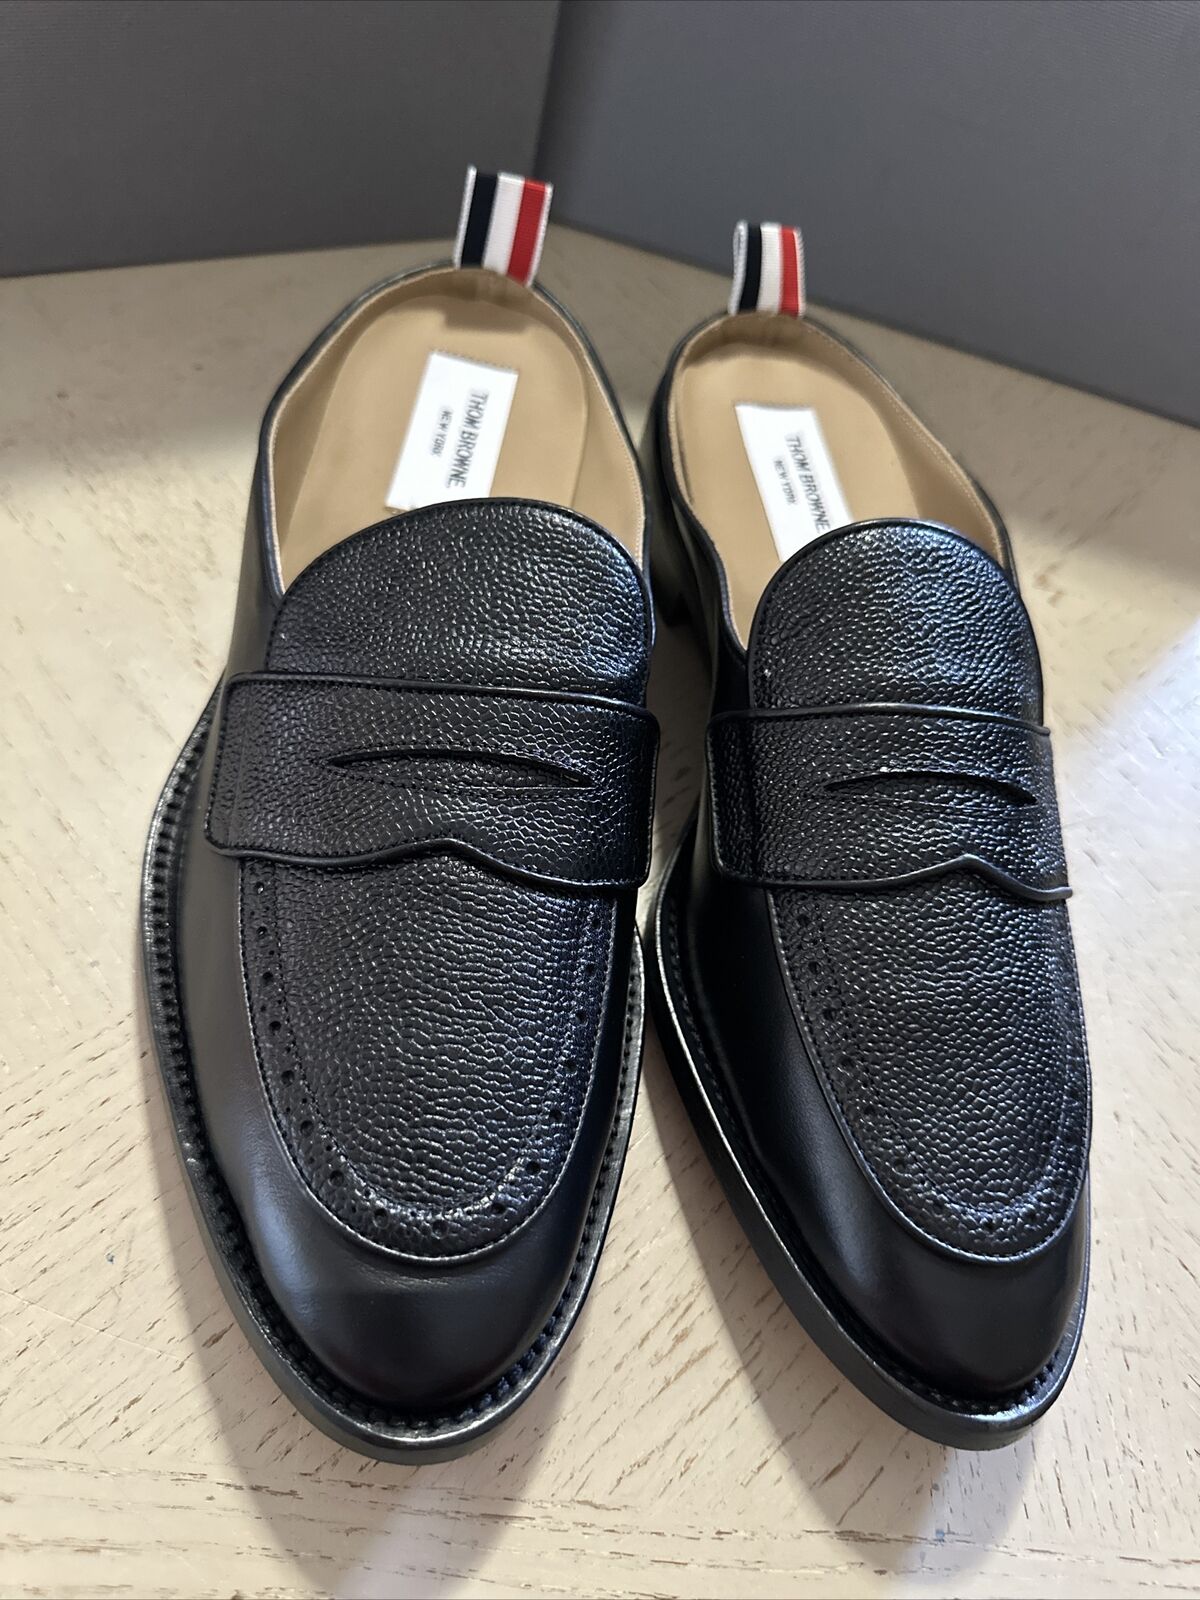 NIB Thom Browne Men Leather Penny Loafers Sandal Shoes Black 10 US / 43 EU Italy